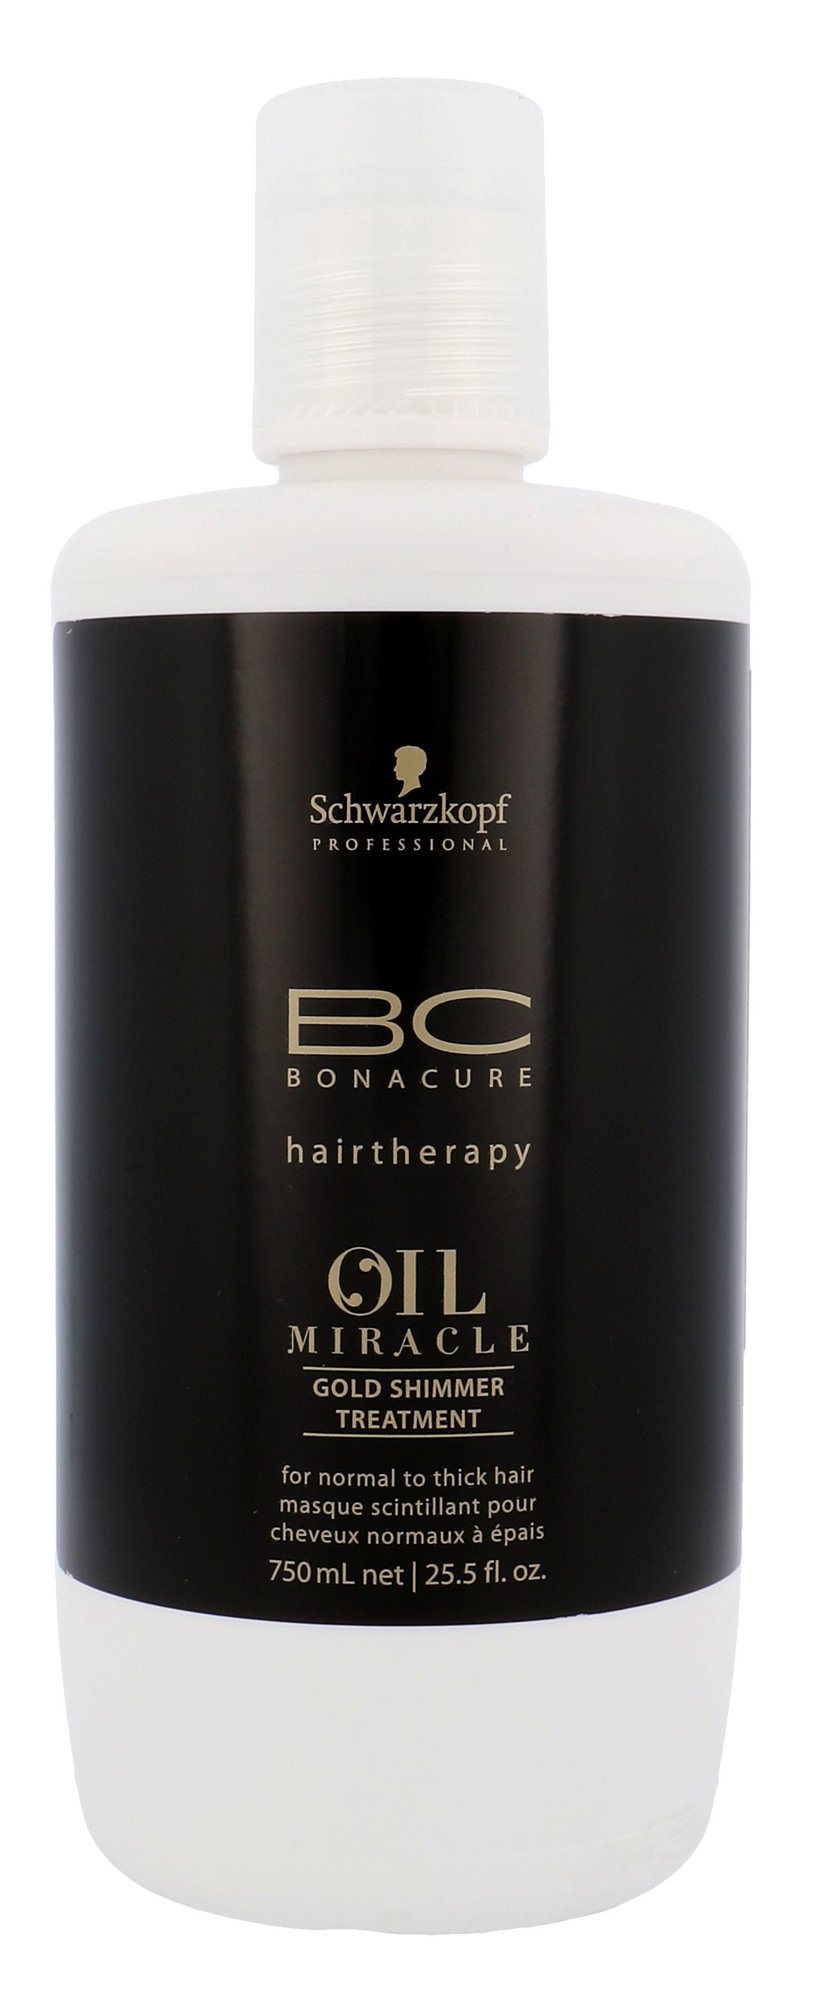 Schwarzkopf BC Oil Miracle Gold Shimmer Treatment Thick Hair